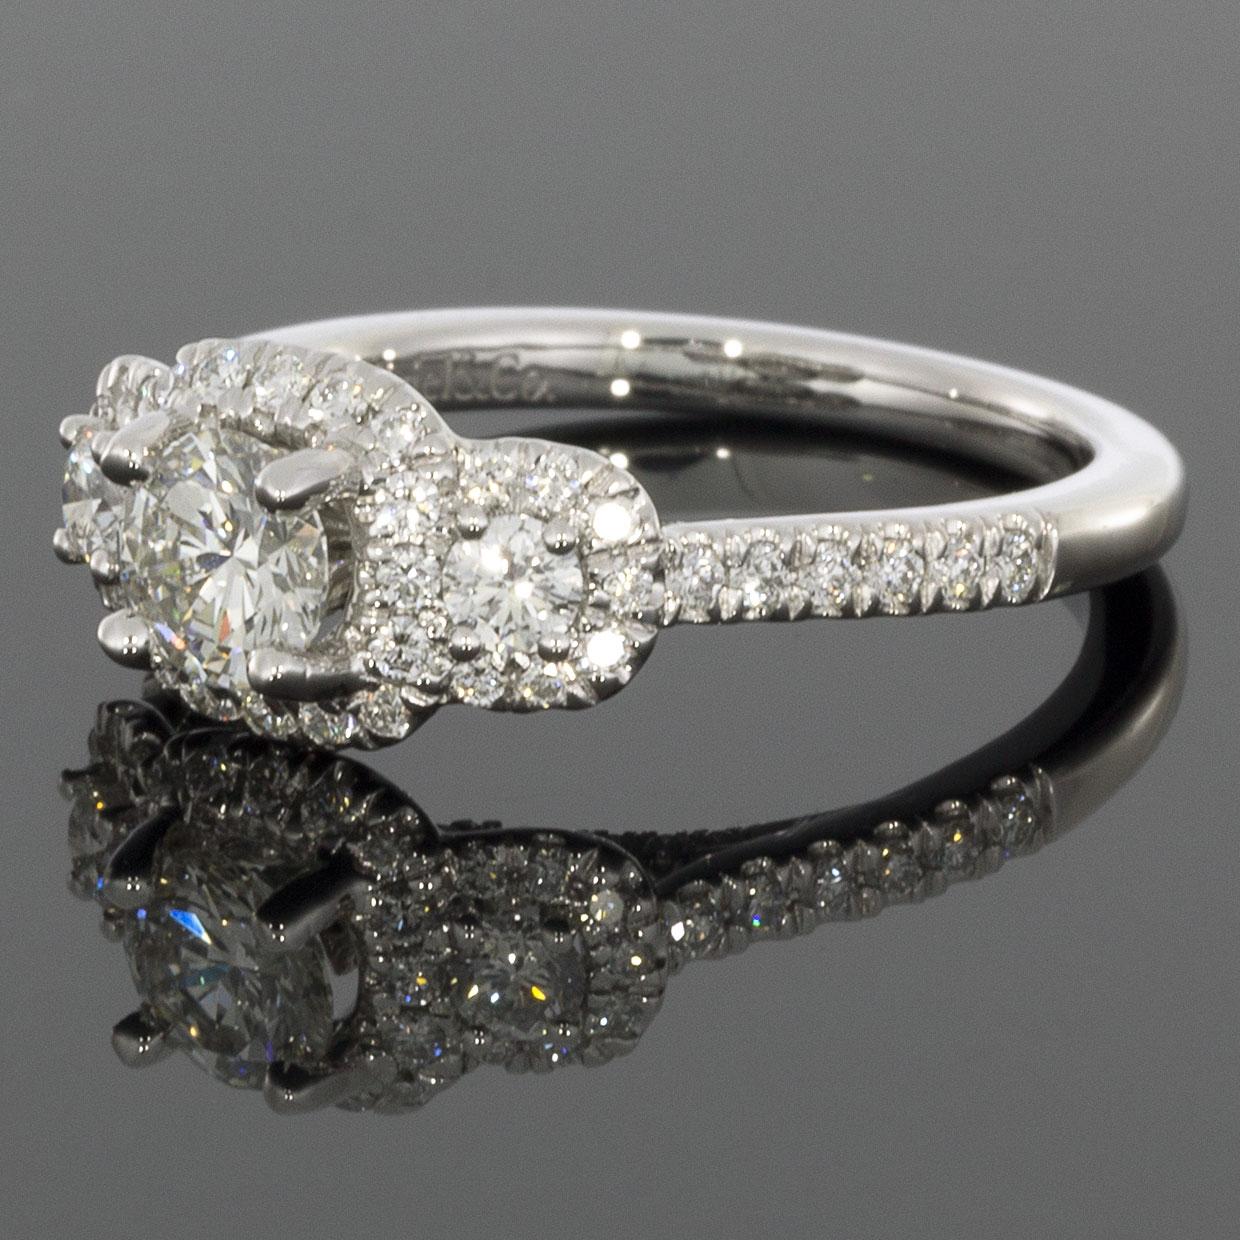 Item Details:
Estimated Retail - $4,500.00
Brand - Gabriel & Co
Metal - White Gold
Total Carat Weight Complete Ring (TCW) - 1.13 ctw
Style - Three Stone Halo Ring
Ring Size - 6.50
Sizable - Yes
Width - 2.10 mm
Metal Purity - 14k

Stone 1